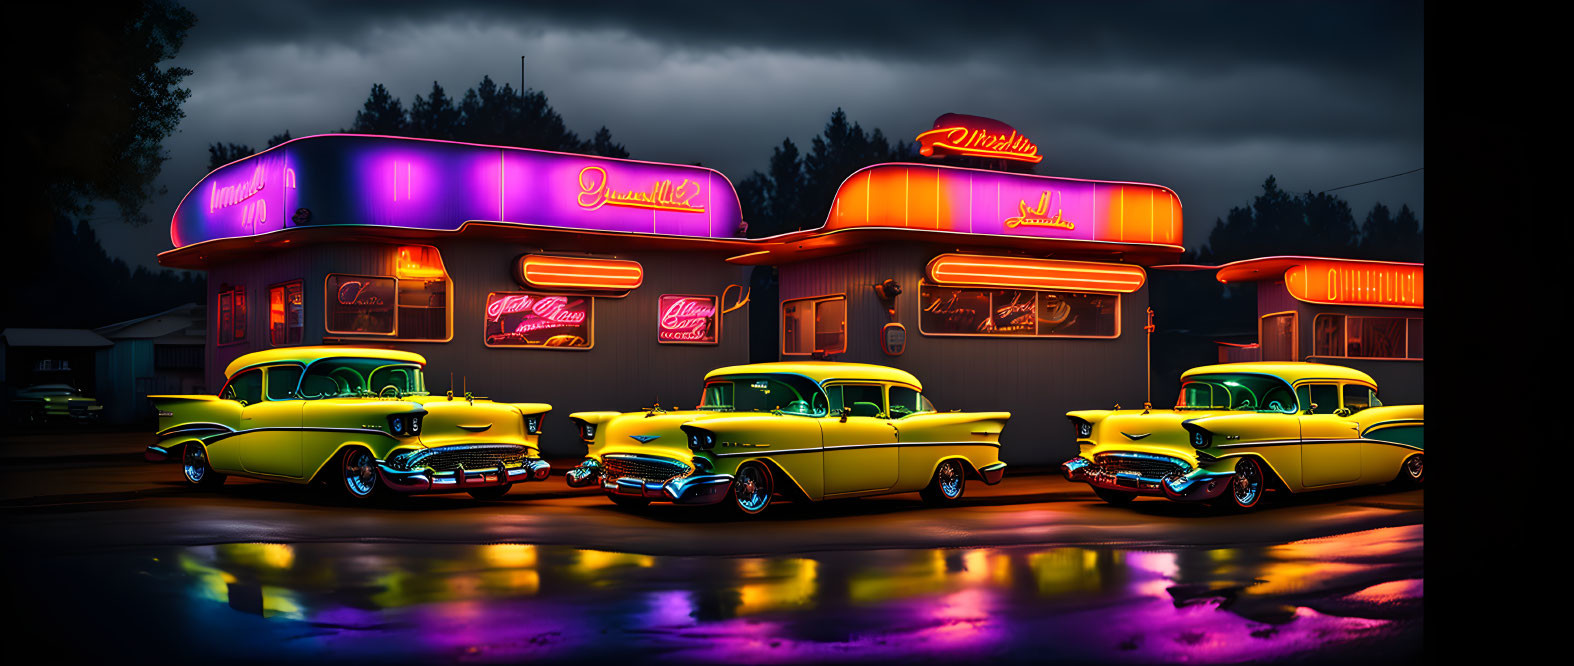 Vintage diner with neon lights and classic cars at night